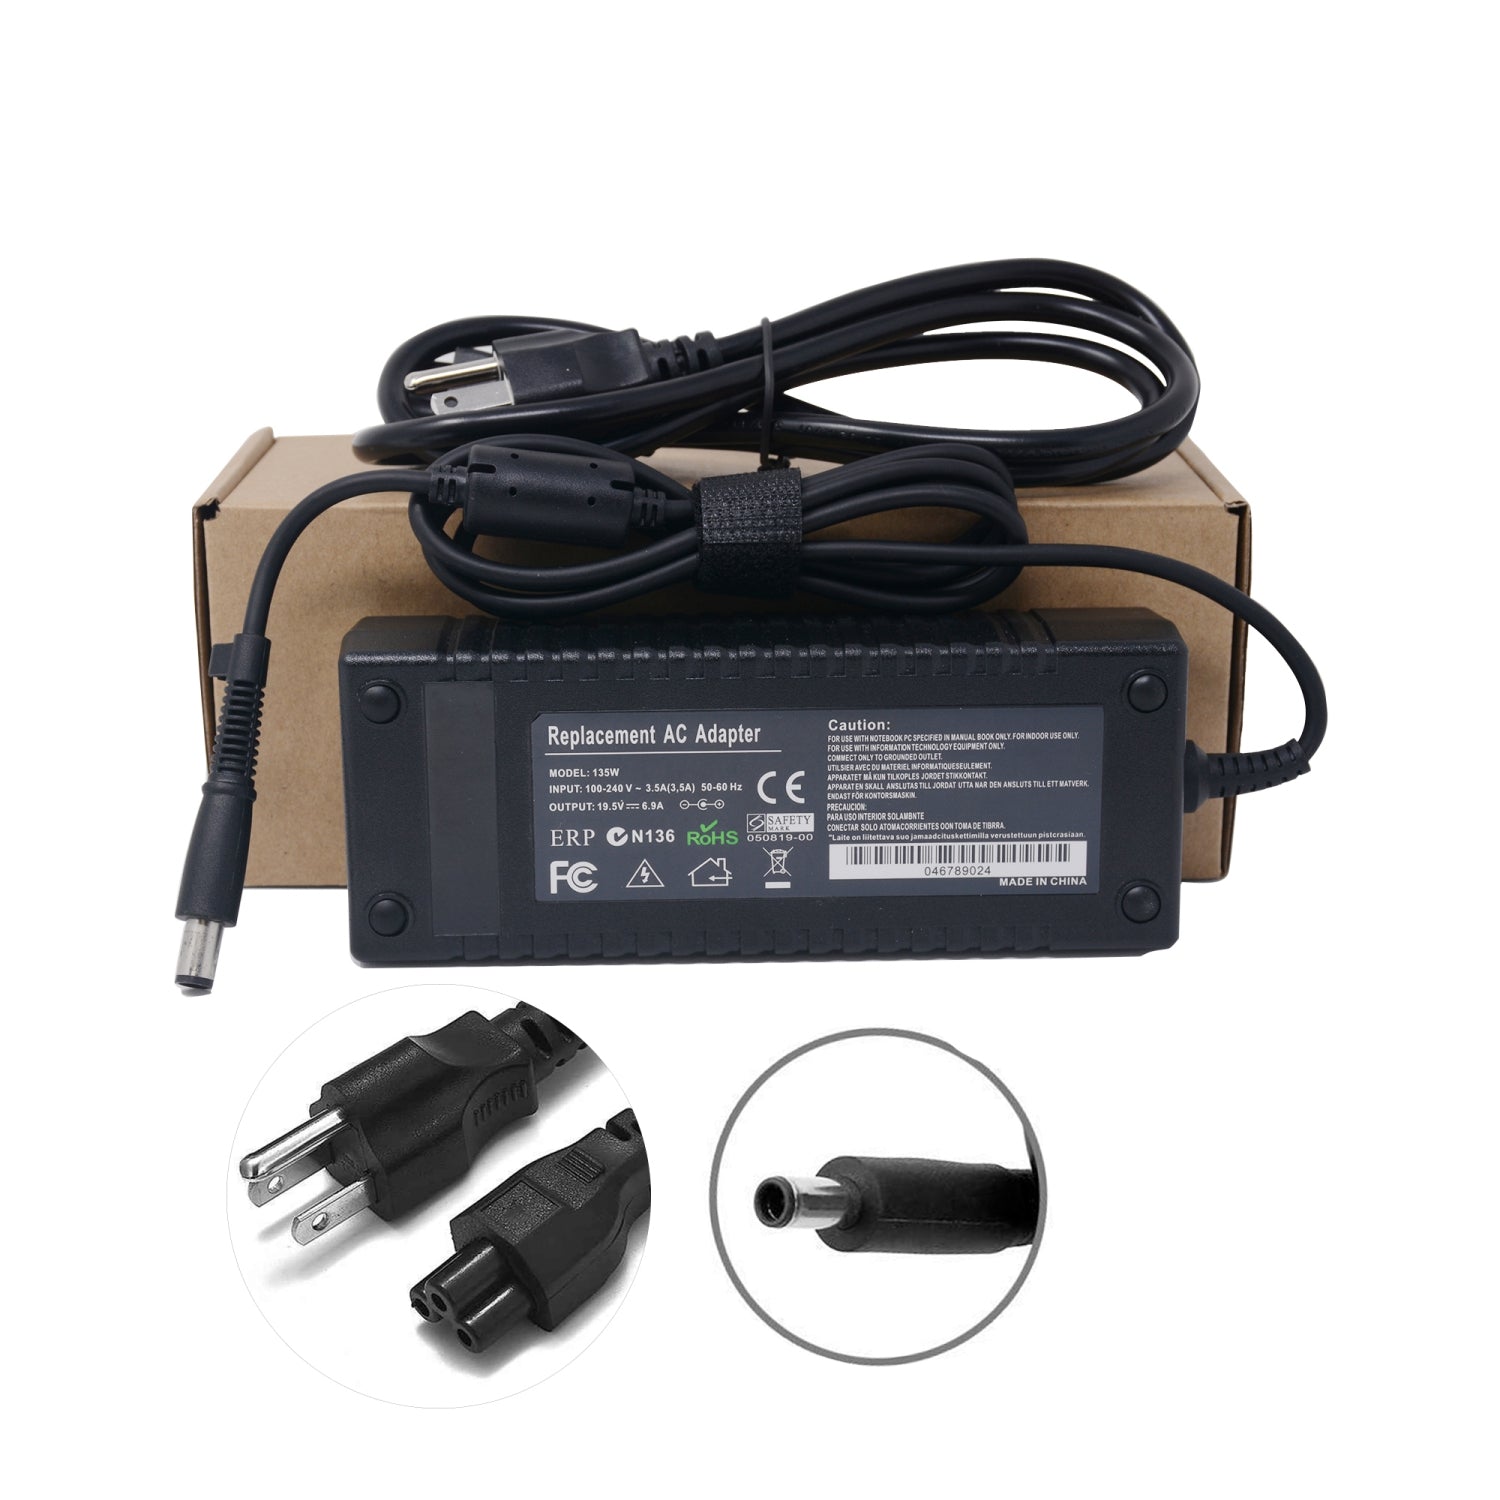 NEW 135W AC adapter charger for HP 19.5V/6.9A Desktop Power Adapter Compatible with HP Desktop 8200 8000 DC7800 Desktop